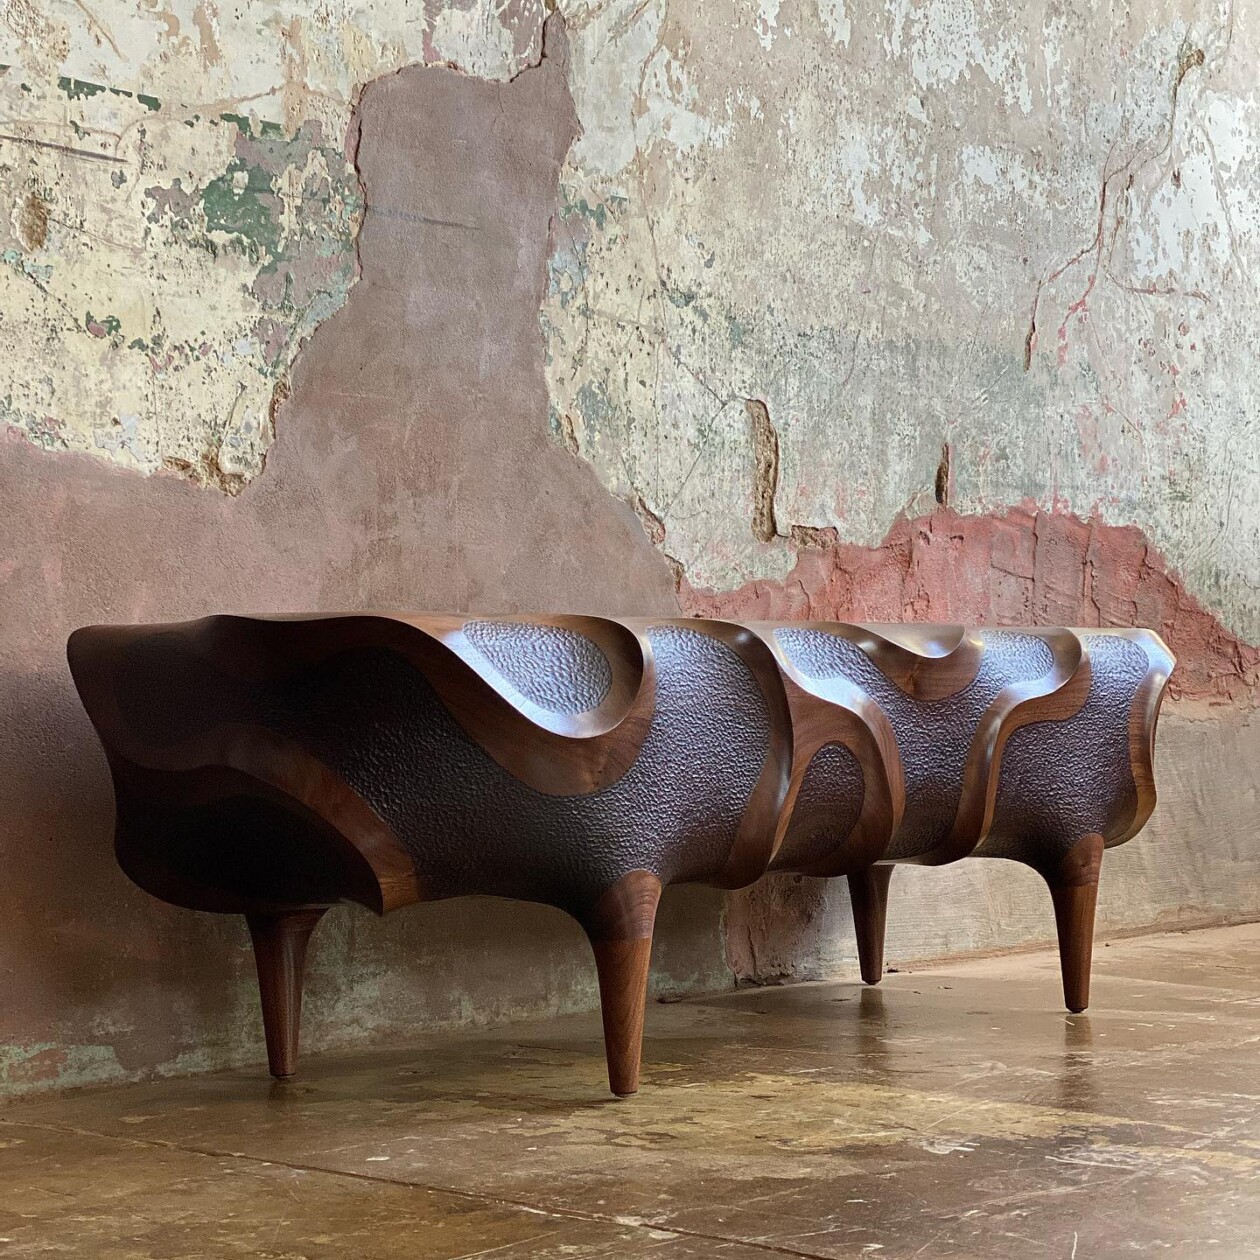 Intricately Engraved And Textured Organic Shaped Furniture By Caleb Woodard (11)